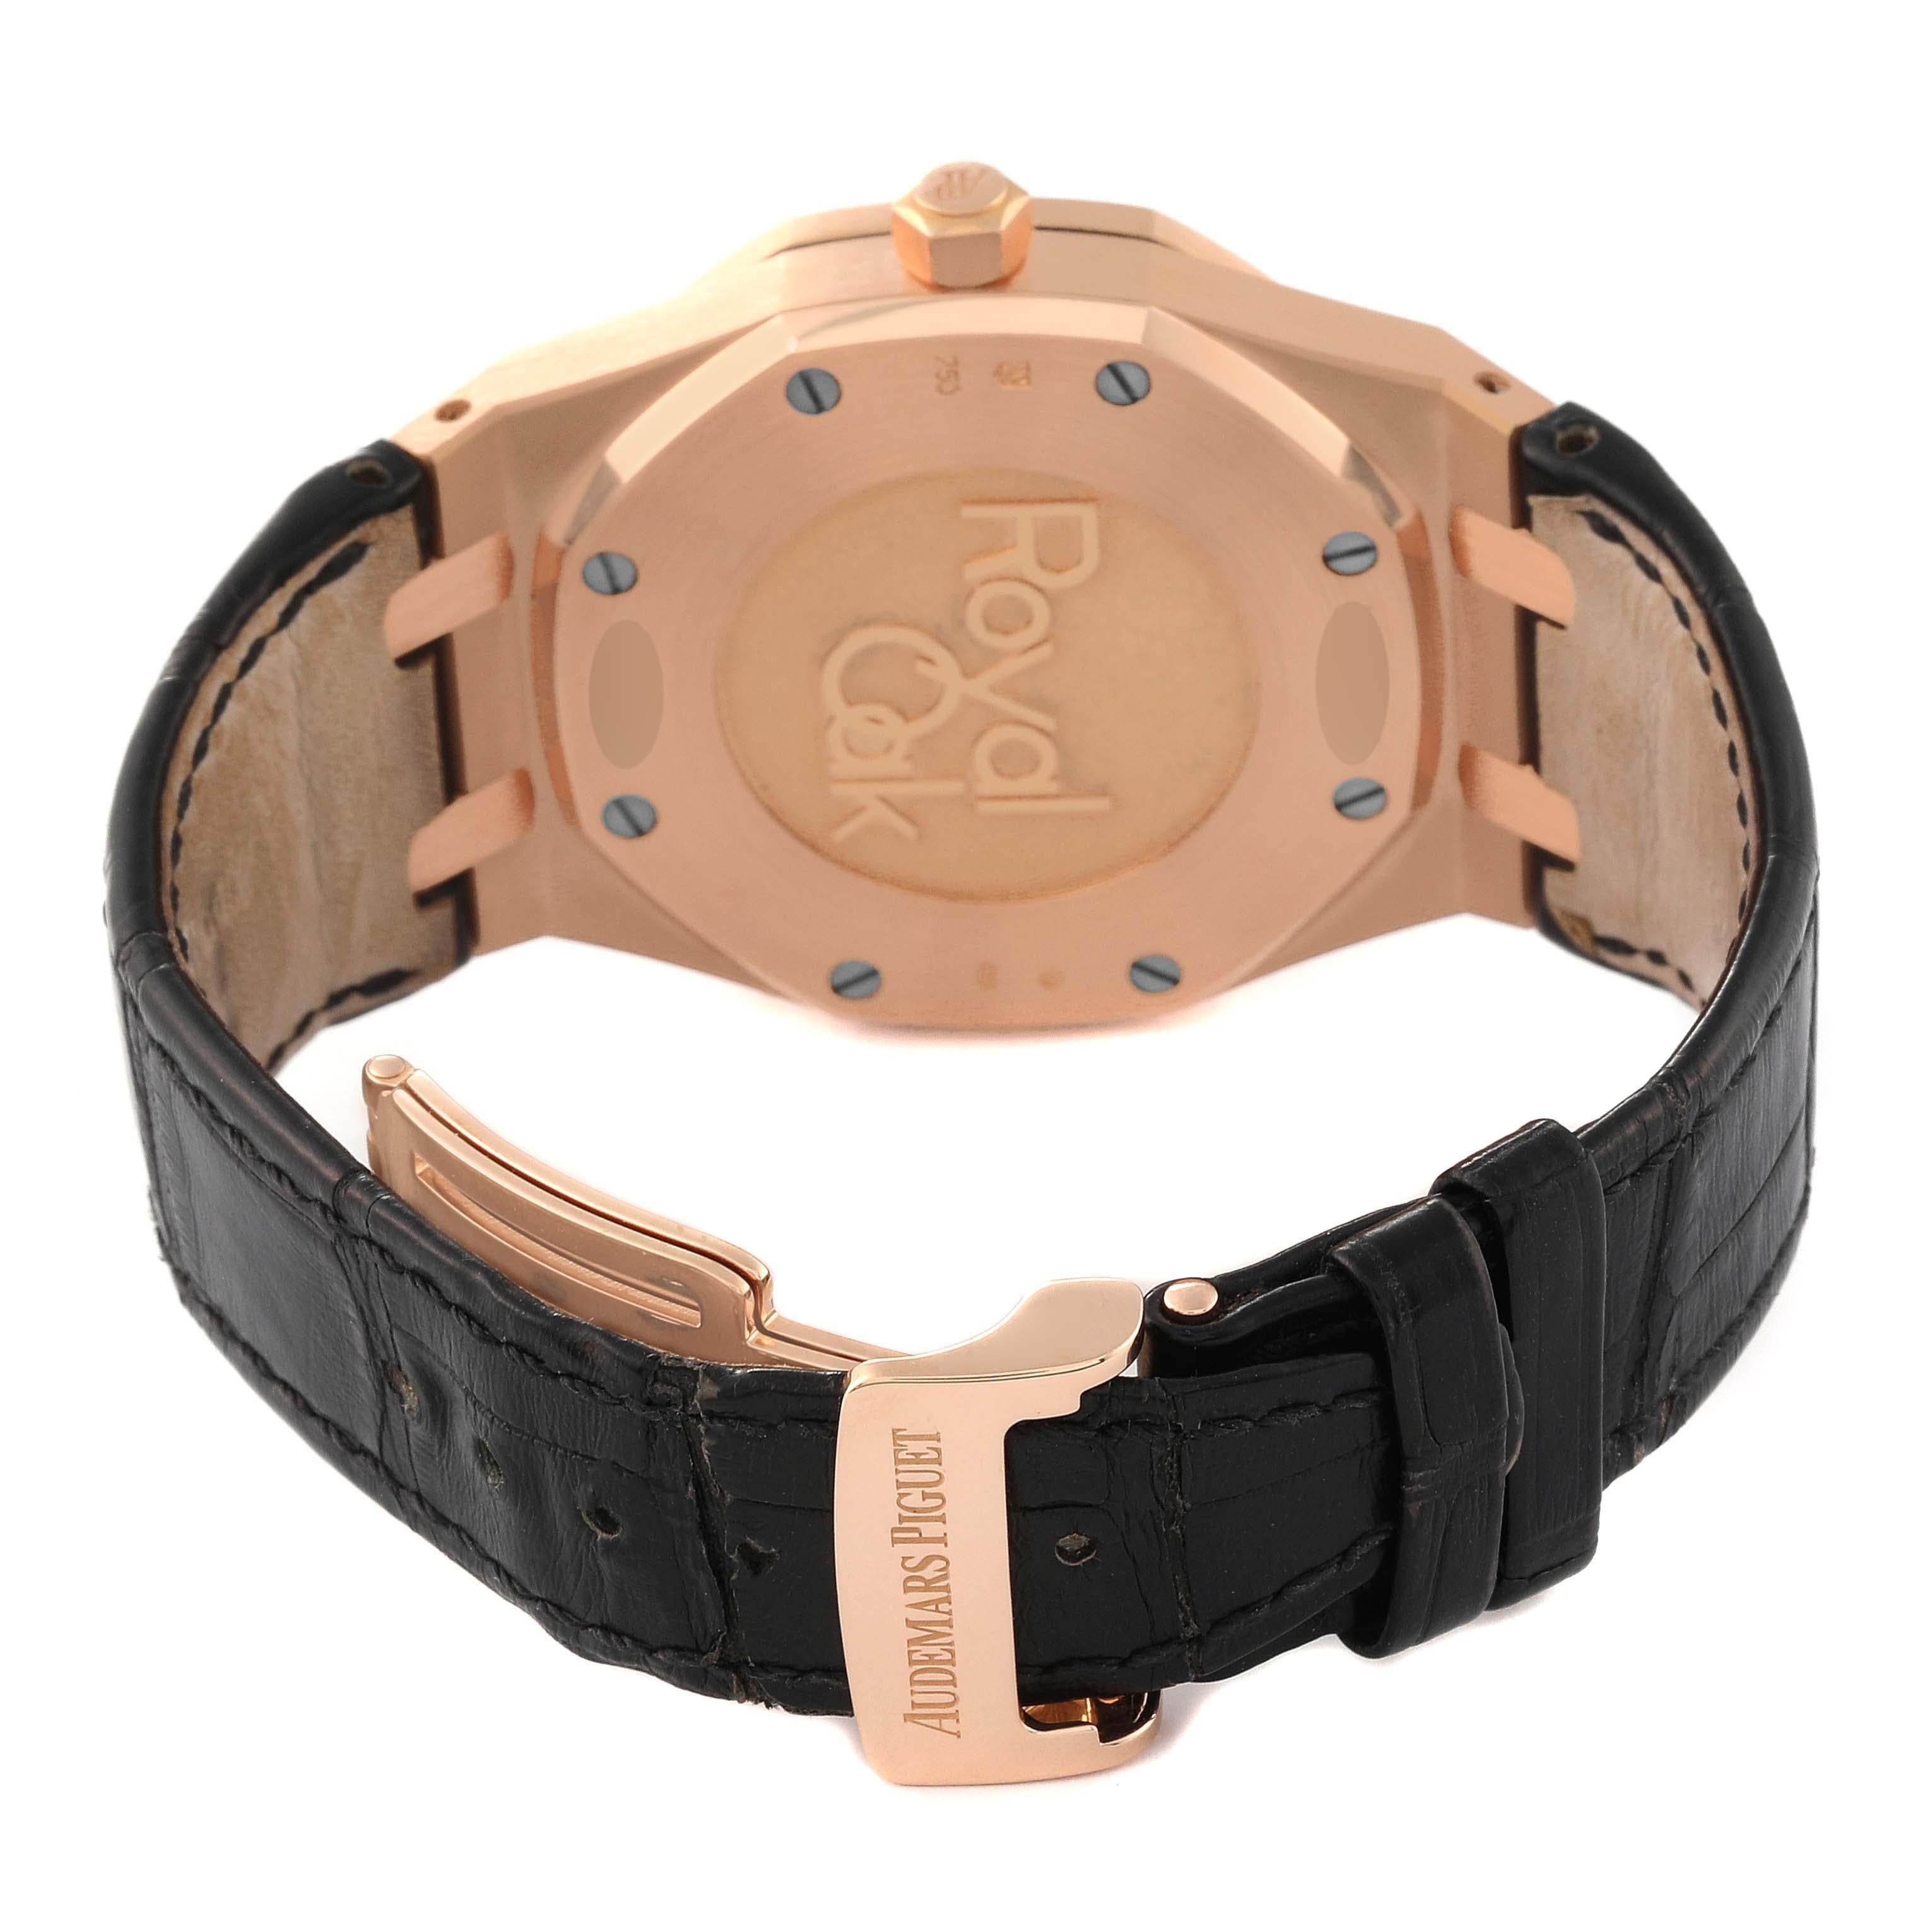 Audemars Piguet Royal Oak Dual Time Rose Gold Mens Watch 26120OR In Excellent Condition For Sale In Atlanta, GA